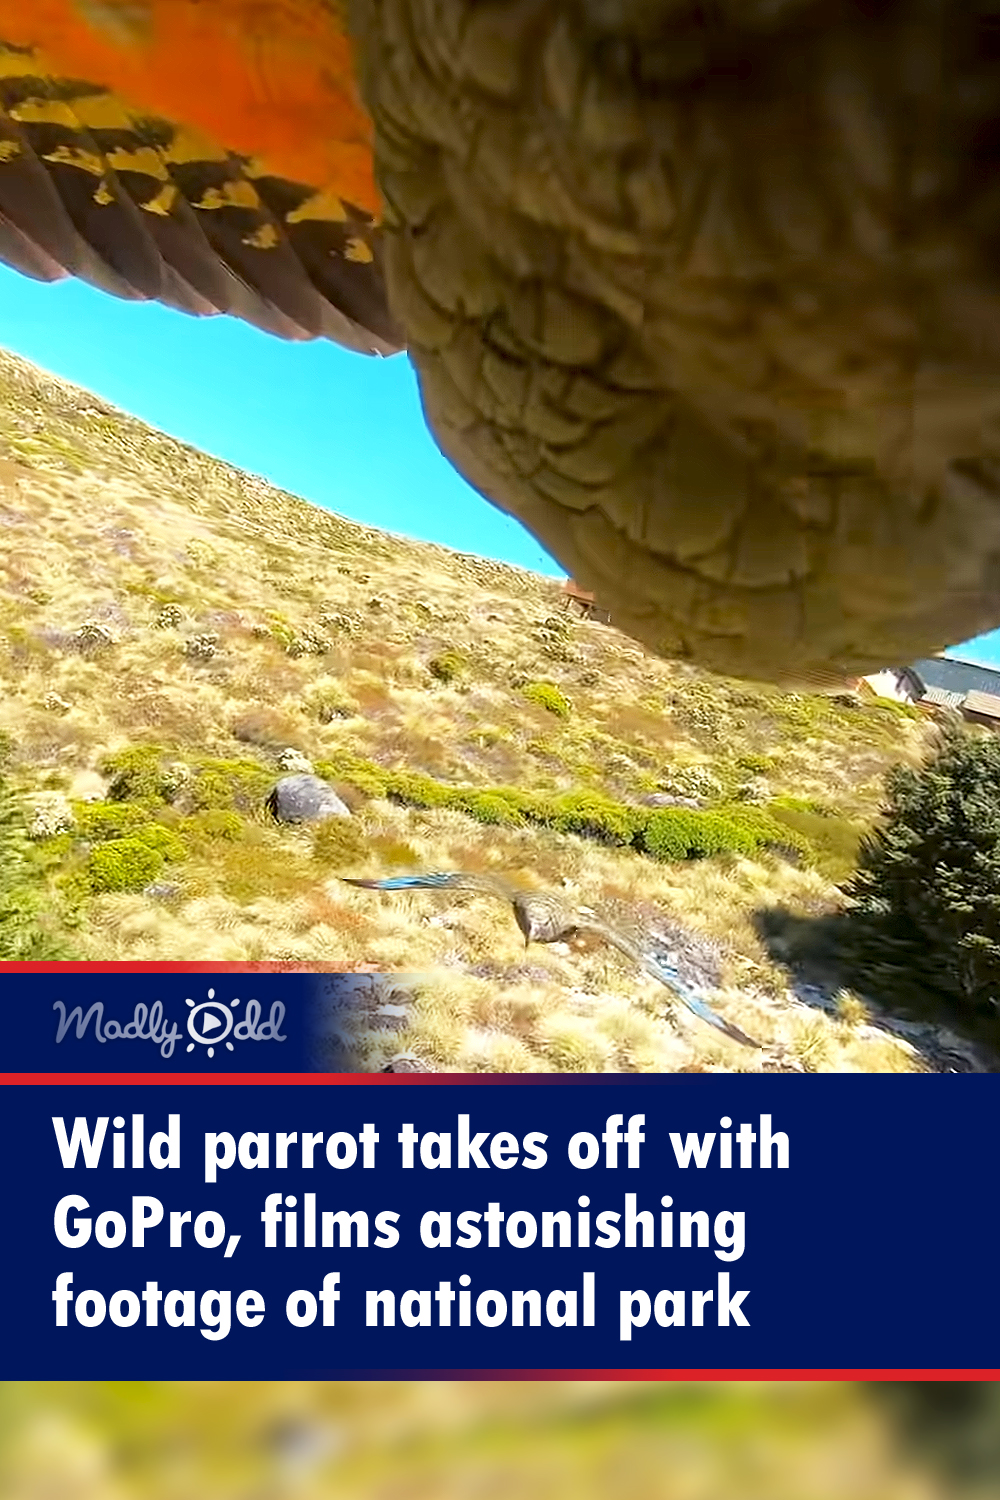 Wild parrot takes off with GoPro, films astonishing footage of national park